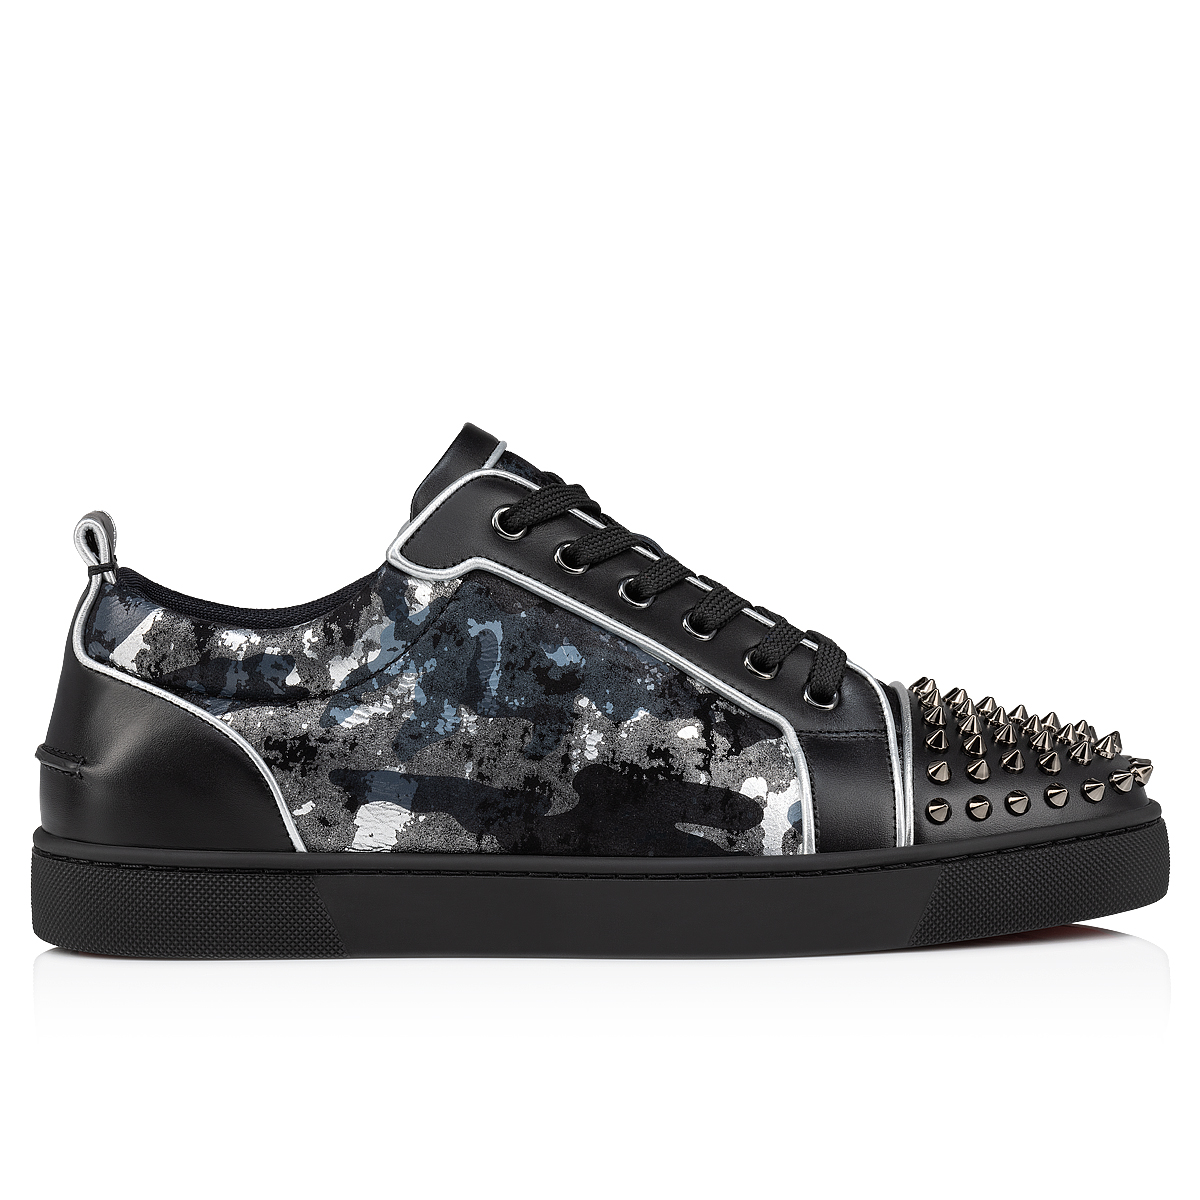 Louis Junior Spikes - Sneakers - Calf leather and spikes - Black -  Christian Louboutin United States